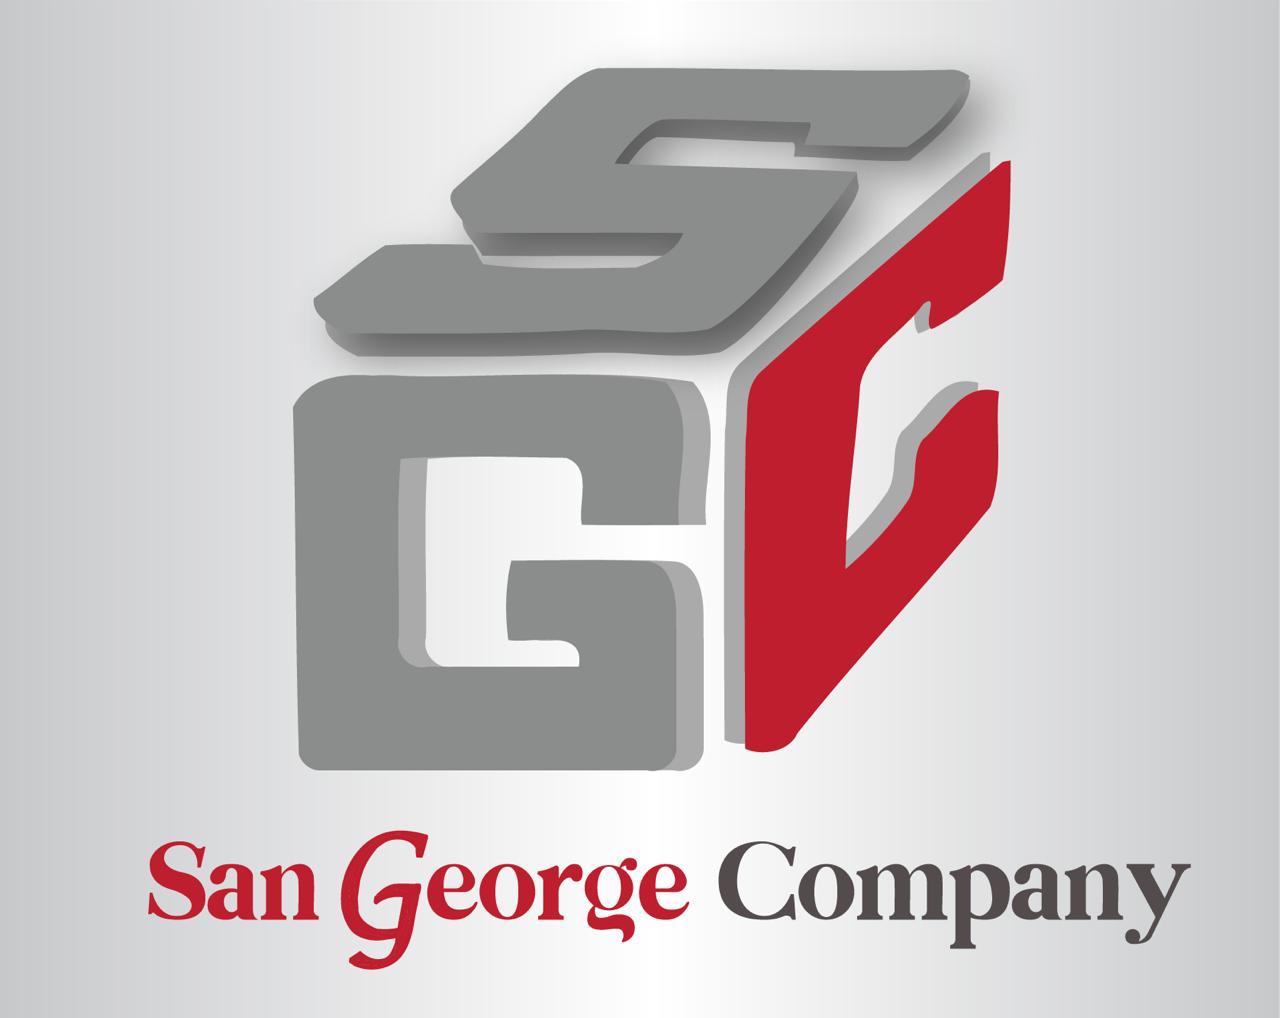 San George for Ceramic and Sanitary Ware